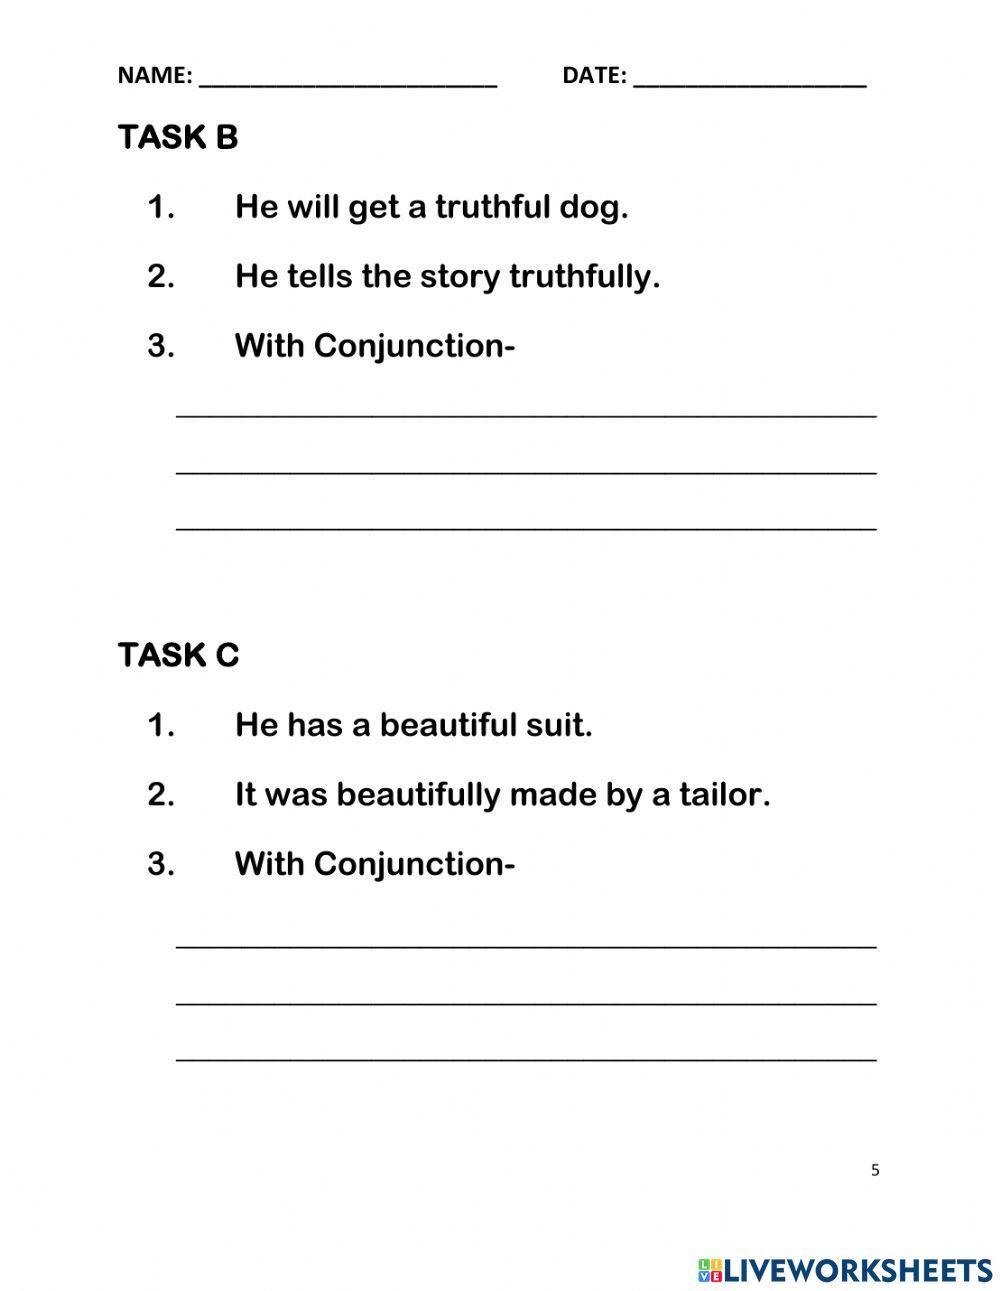 Conjunctions, Compound Words, Suffixes, Adverbs and Adjectives